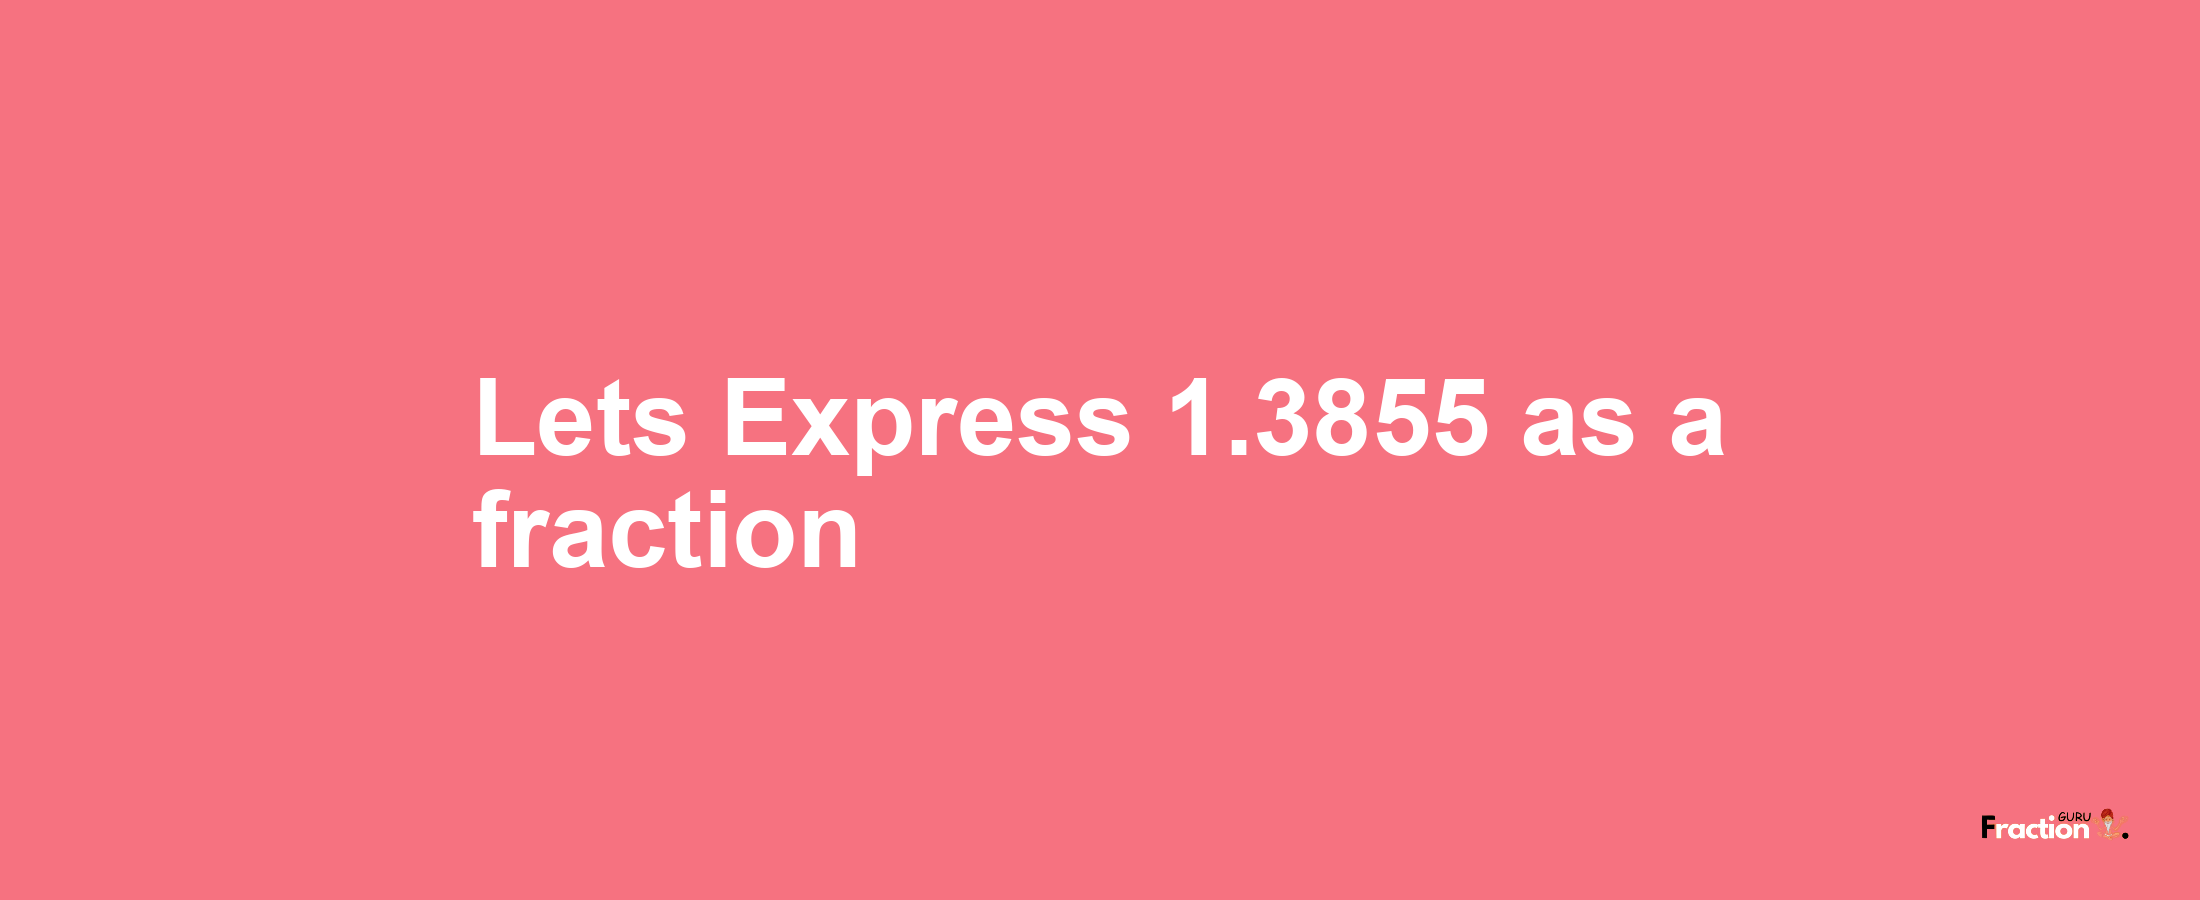 Lets Express 1.3855 as afraction